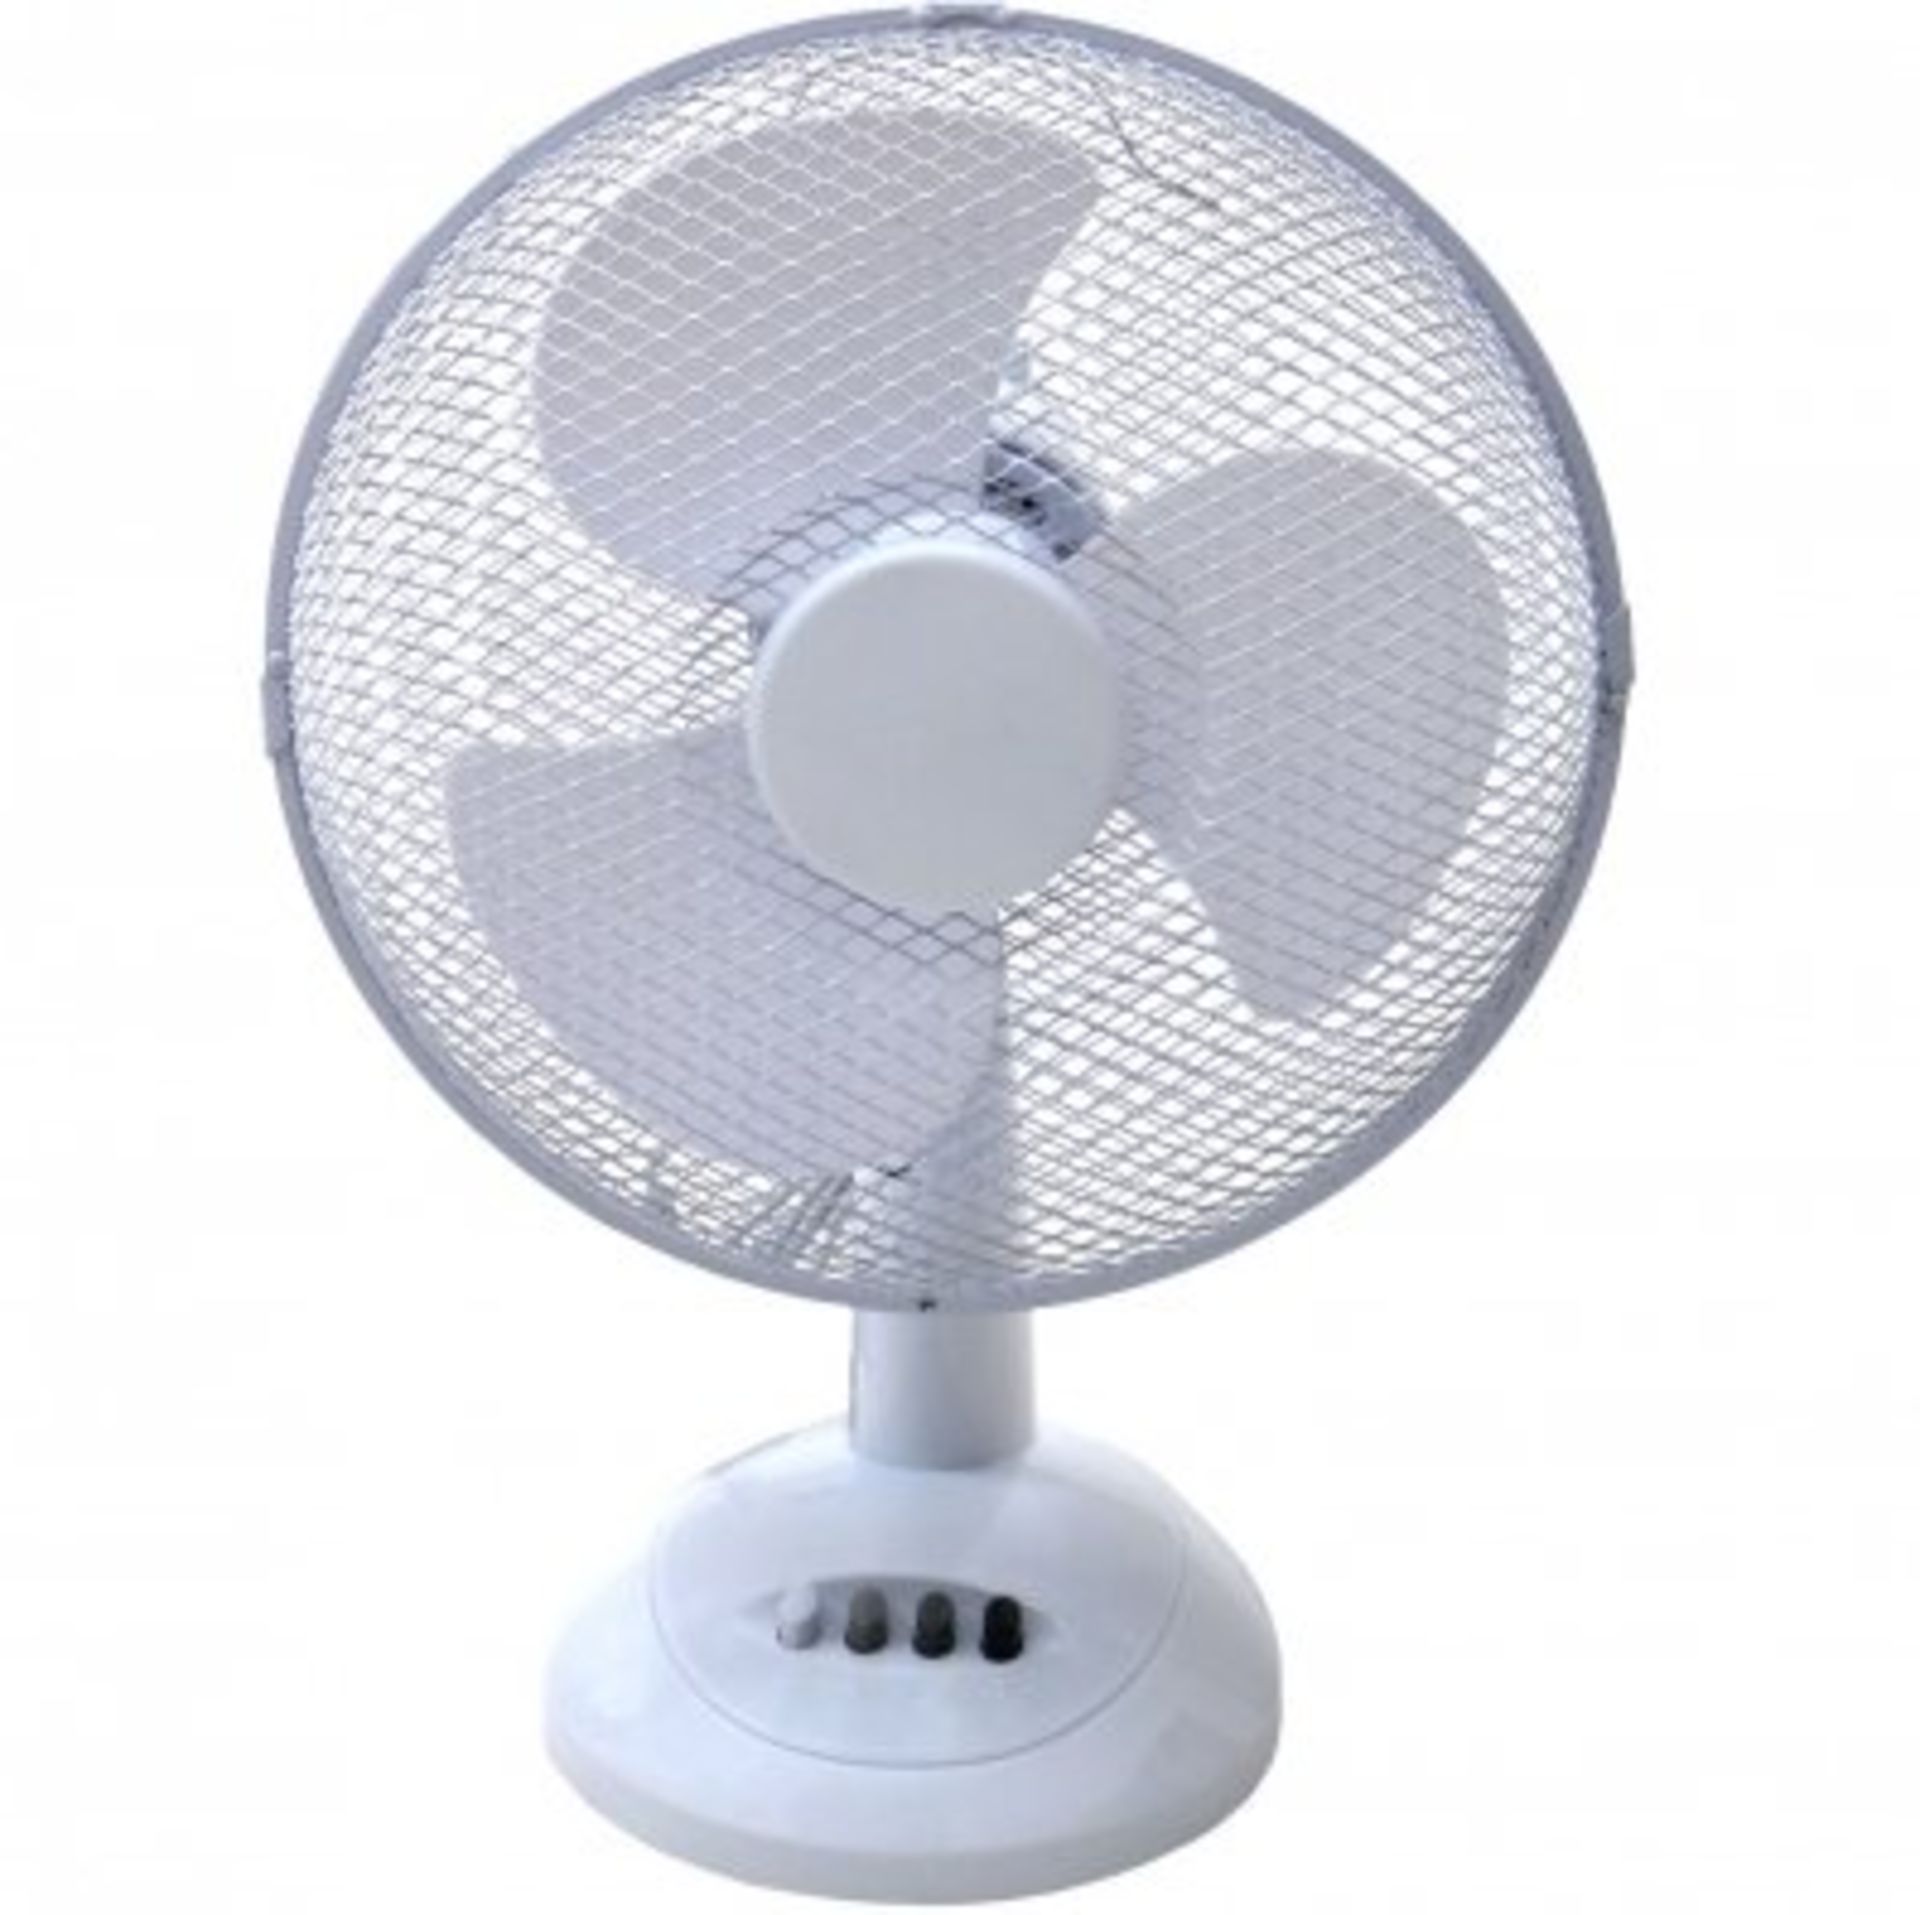 (PP8) 12" Oscillating White Desk Top Fan Stay cool this year with the 12" desk top fan....